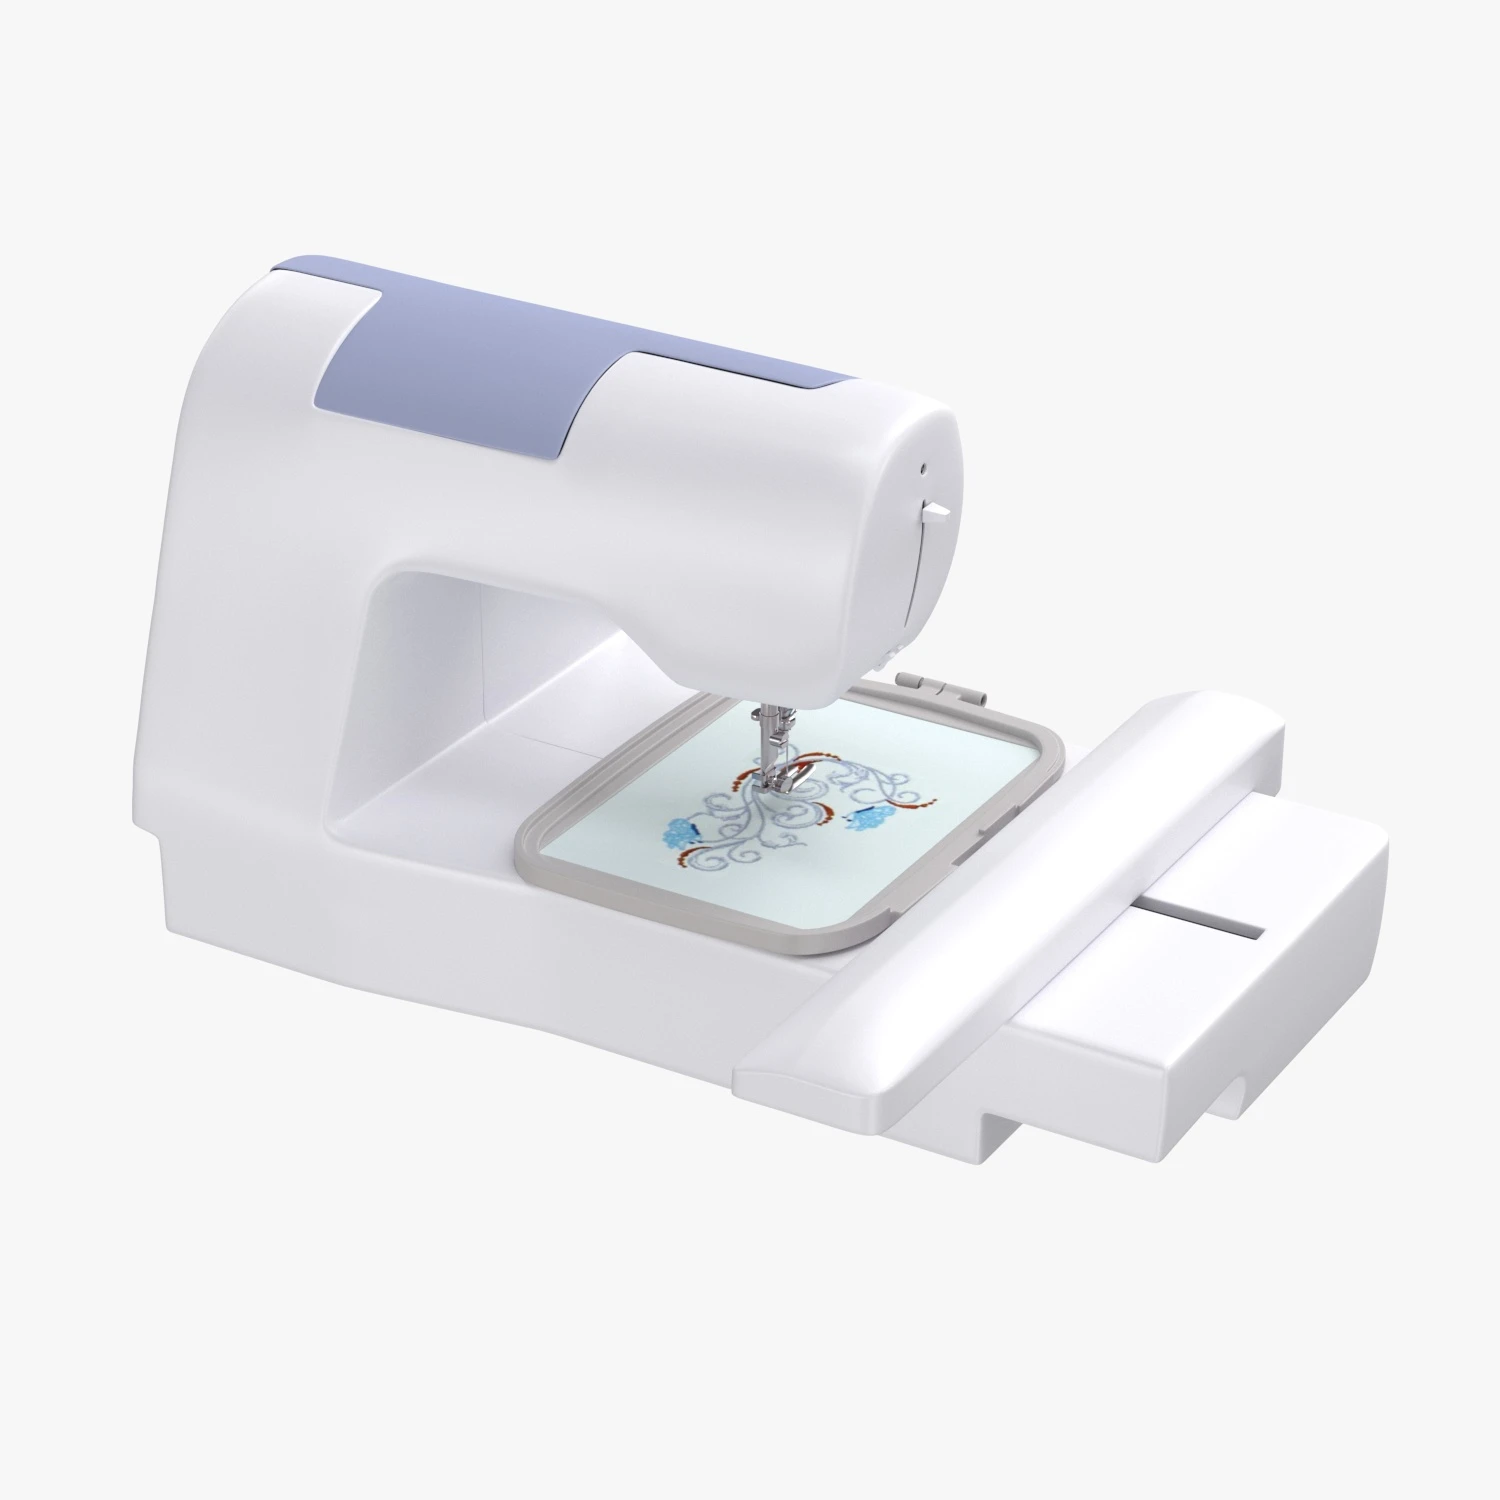 Brother PE800 Embroidery Machine 3D Model_06